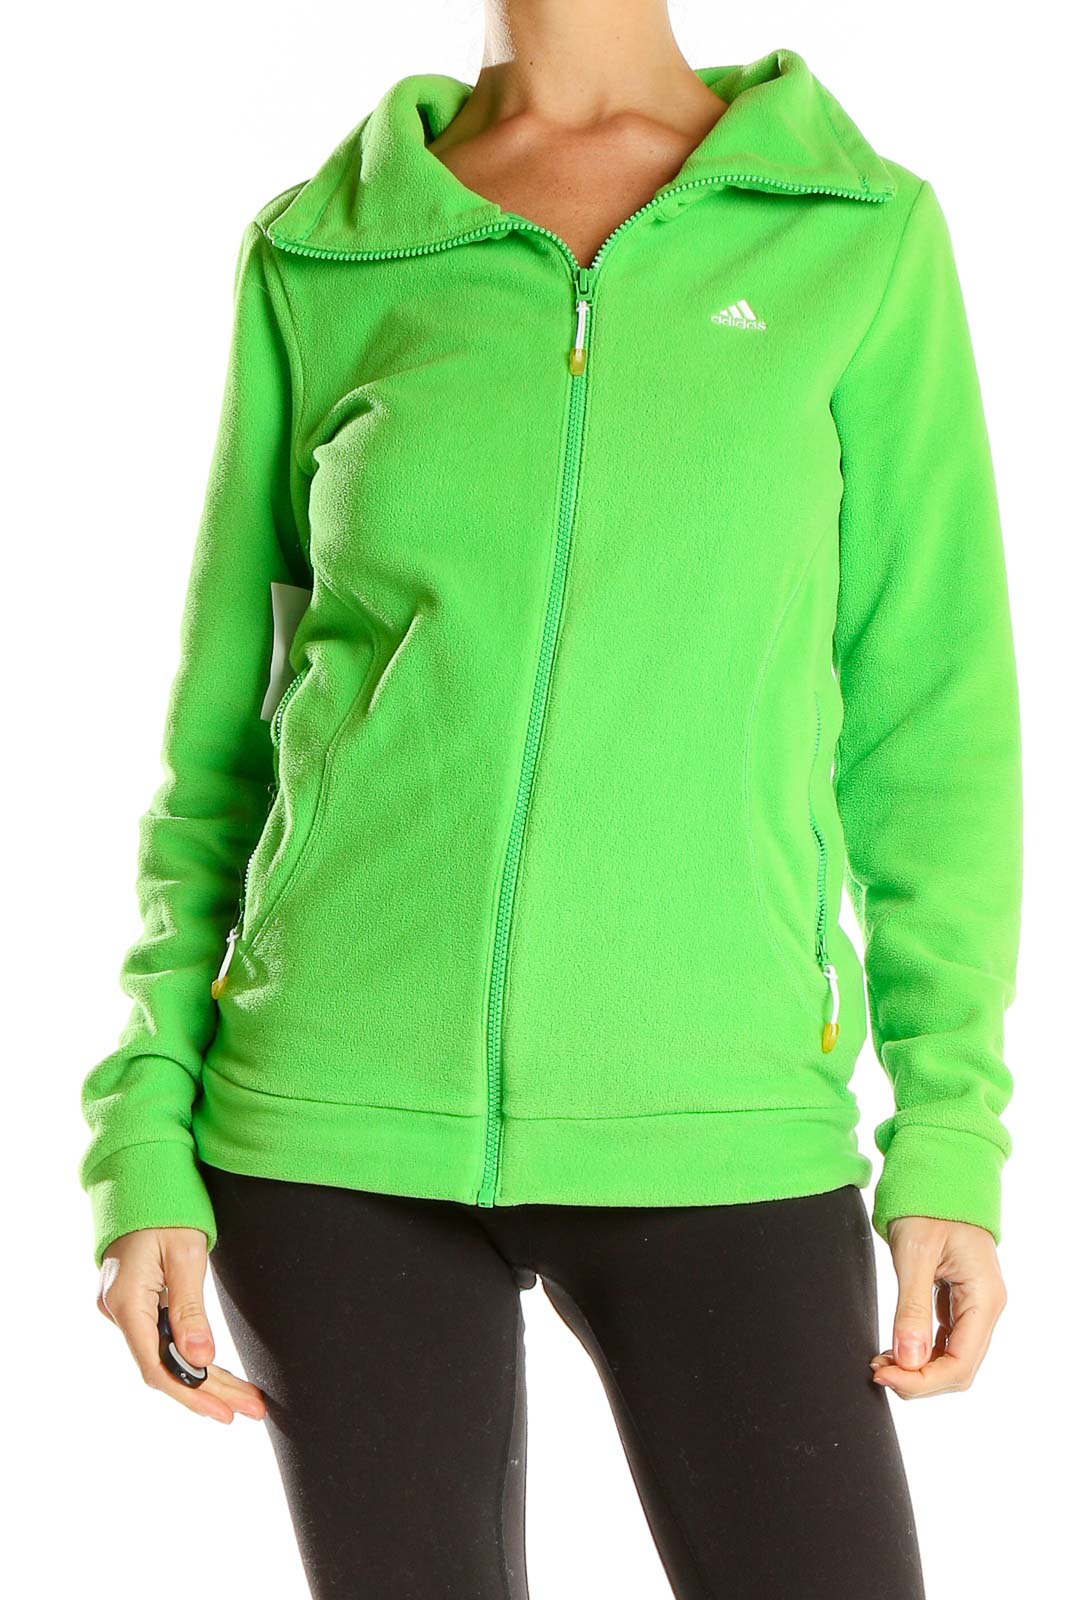 Green Soft Activewear Jacket Front